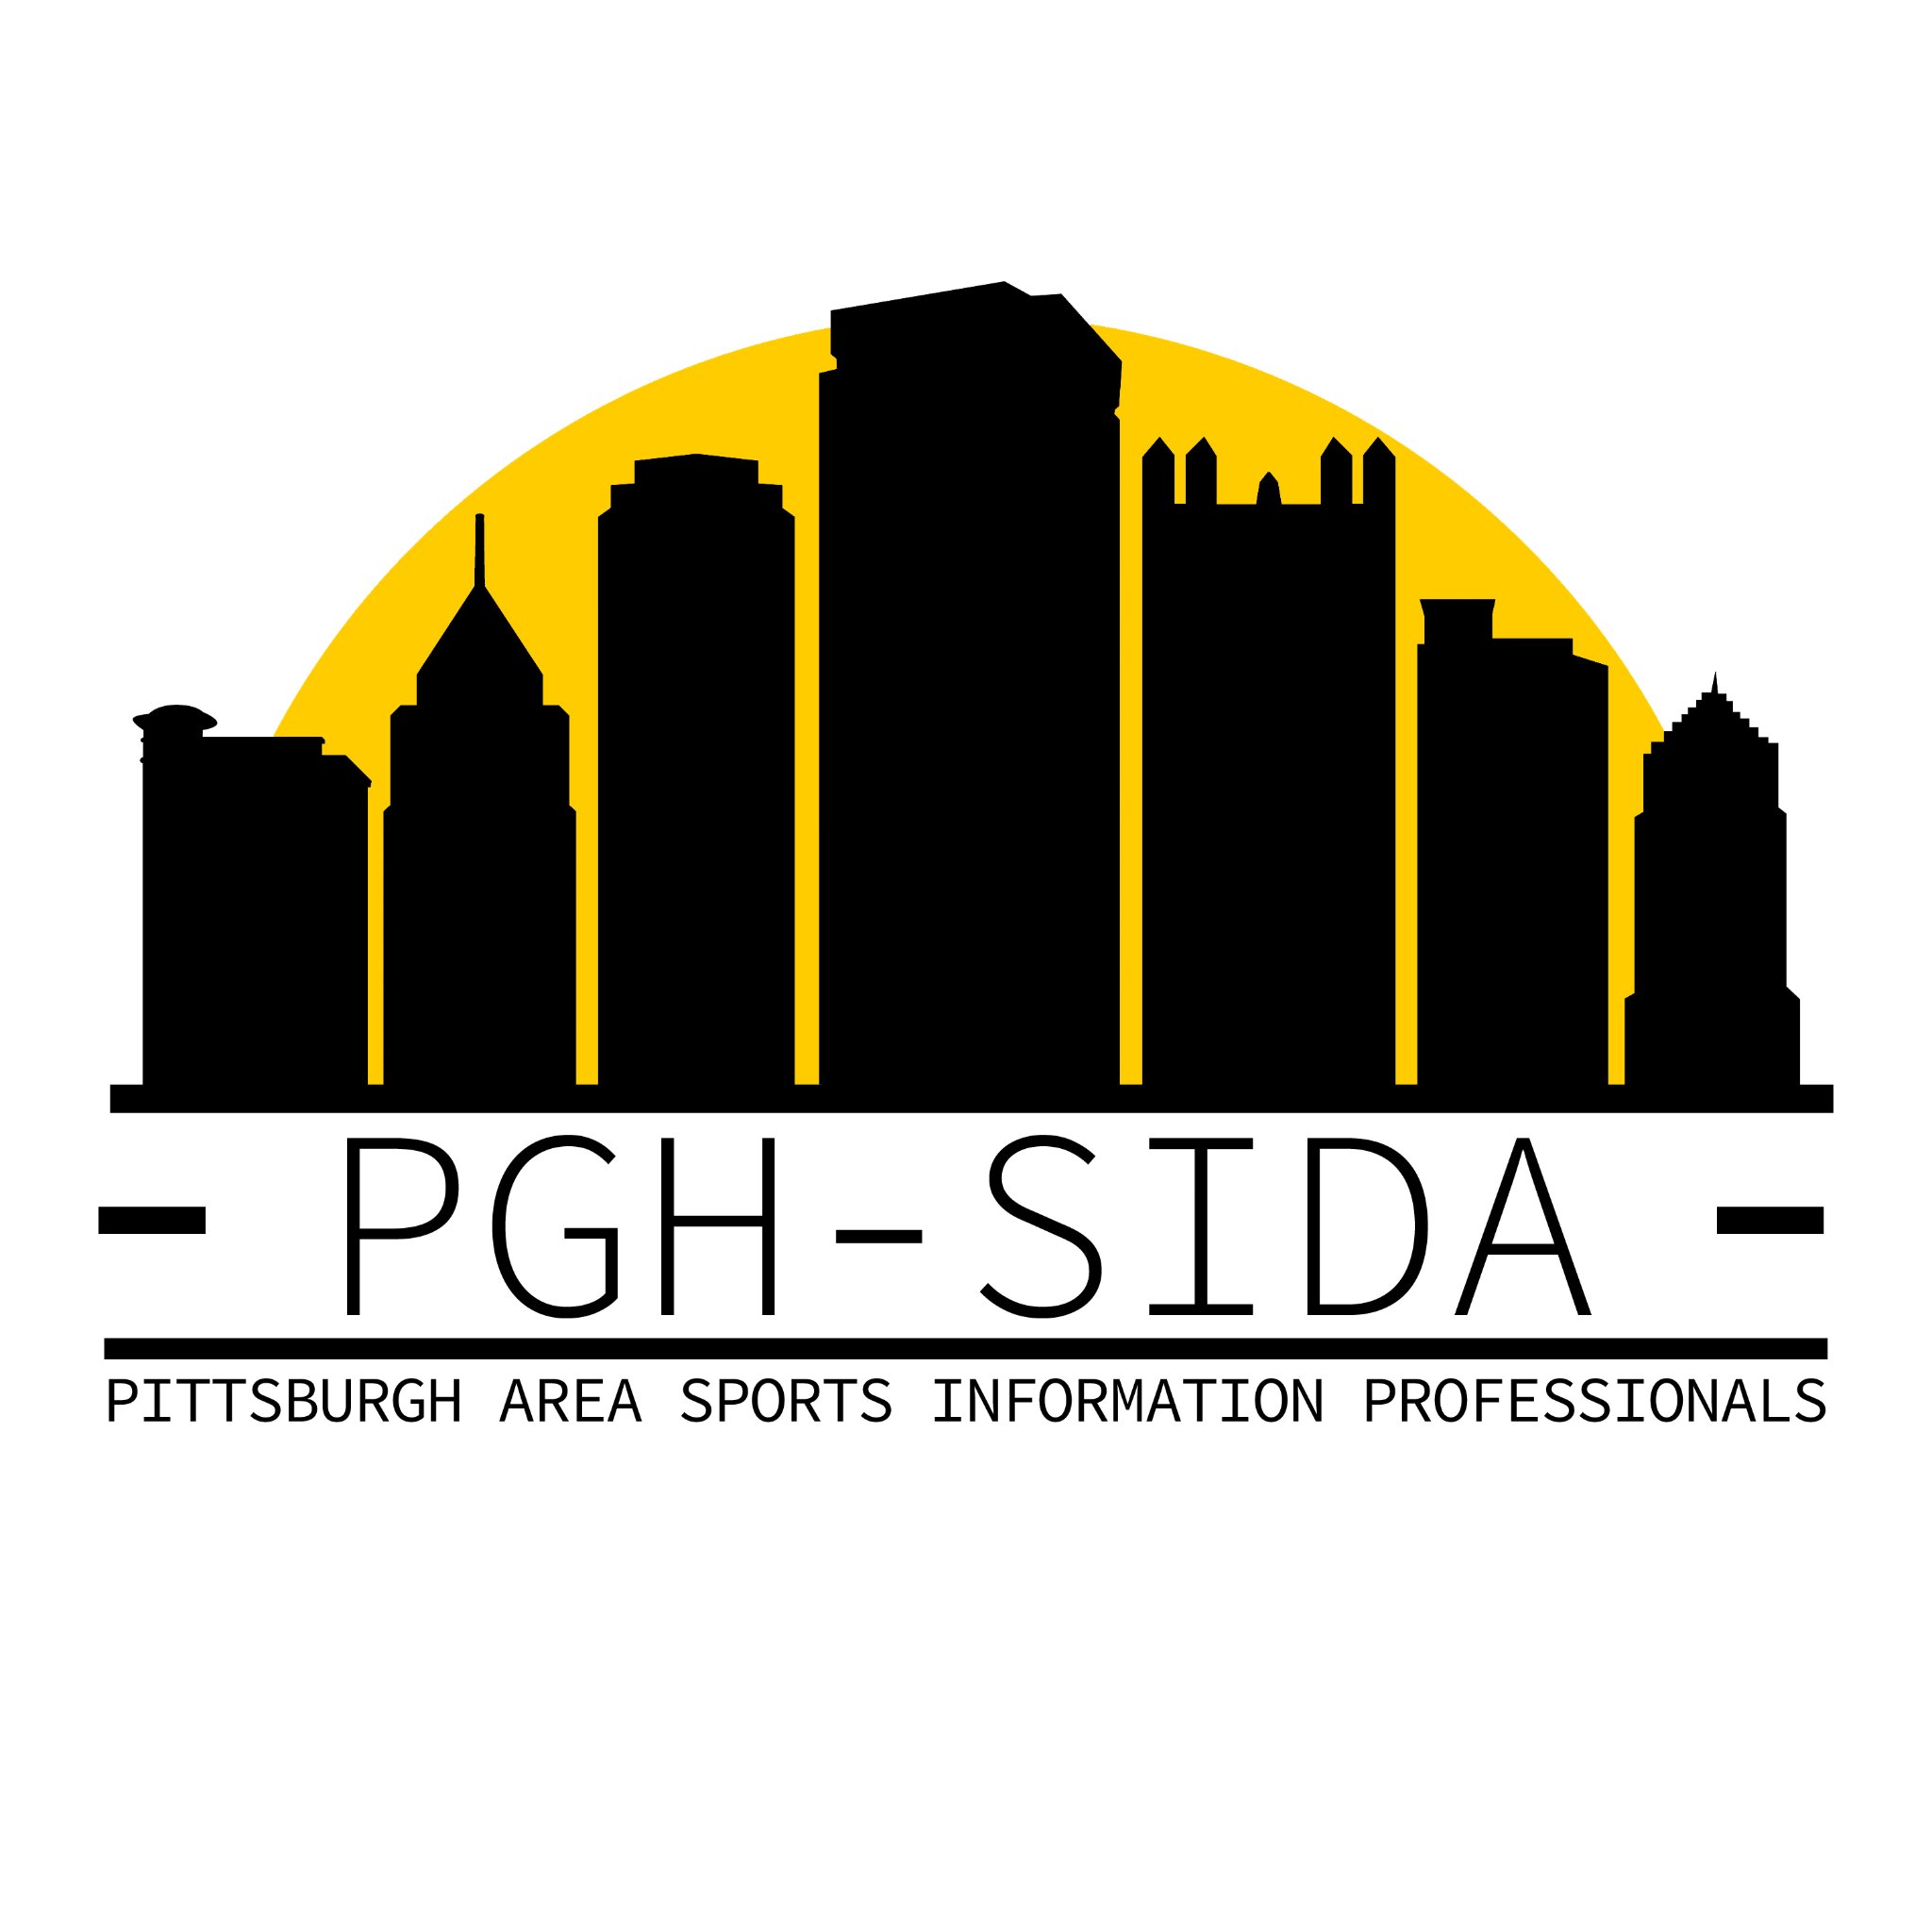 Pittsburgh area sports information professionals. Info on social gatherings and events will be shared here.